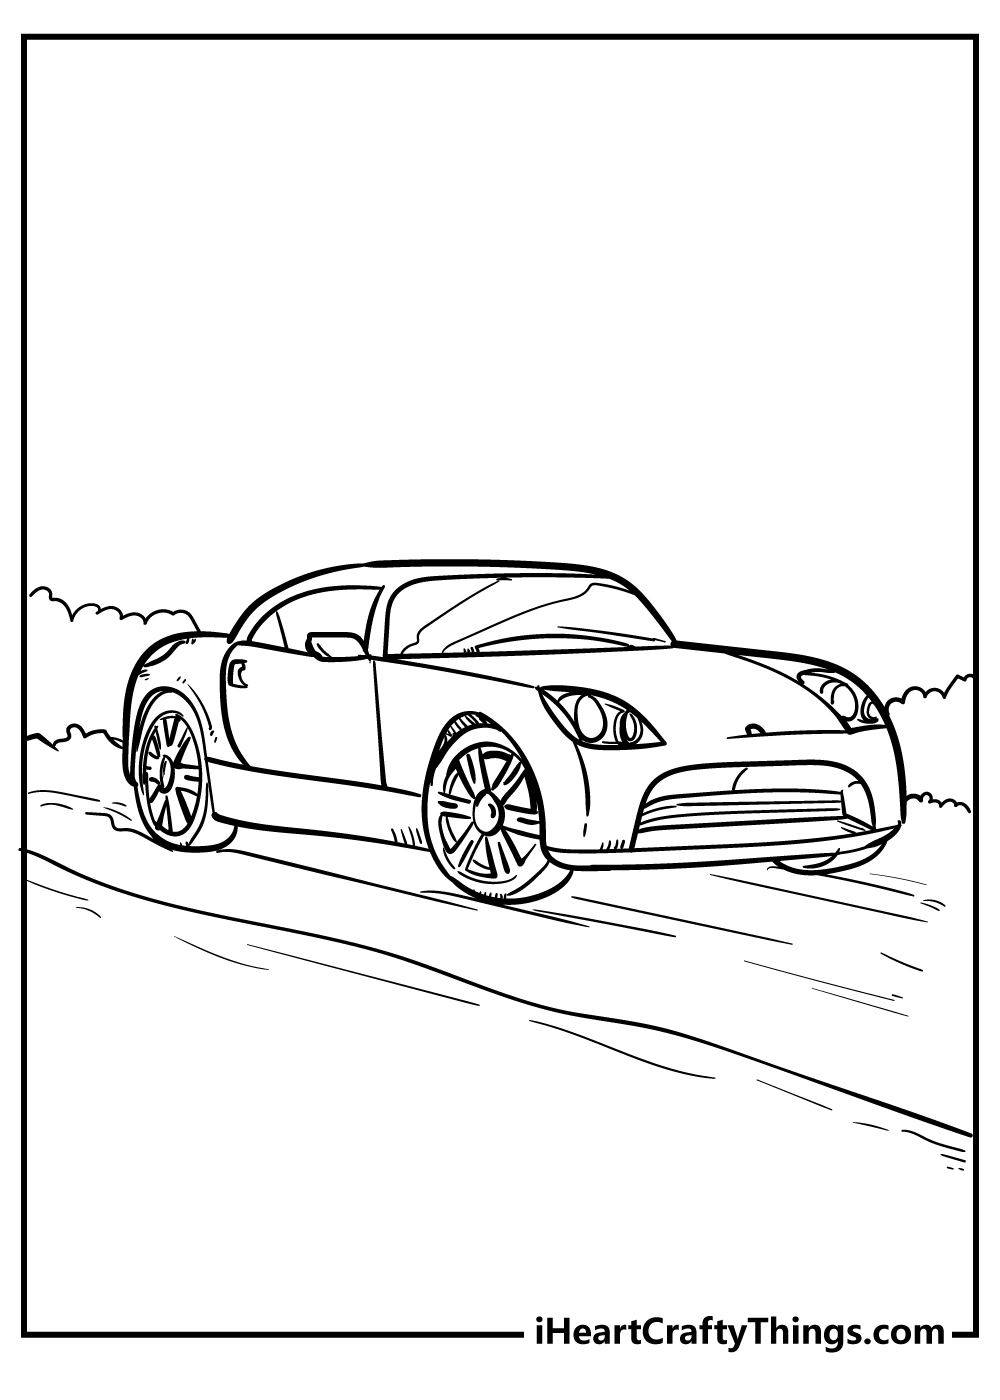 Cool car coloring pages free printables